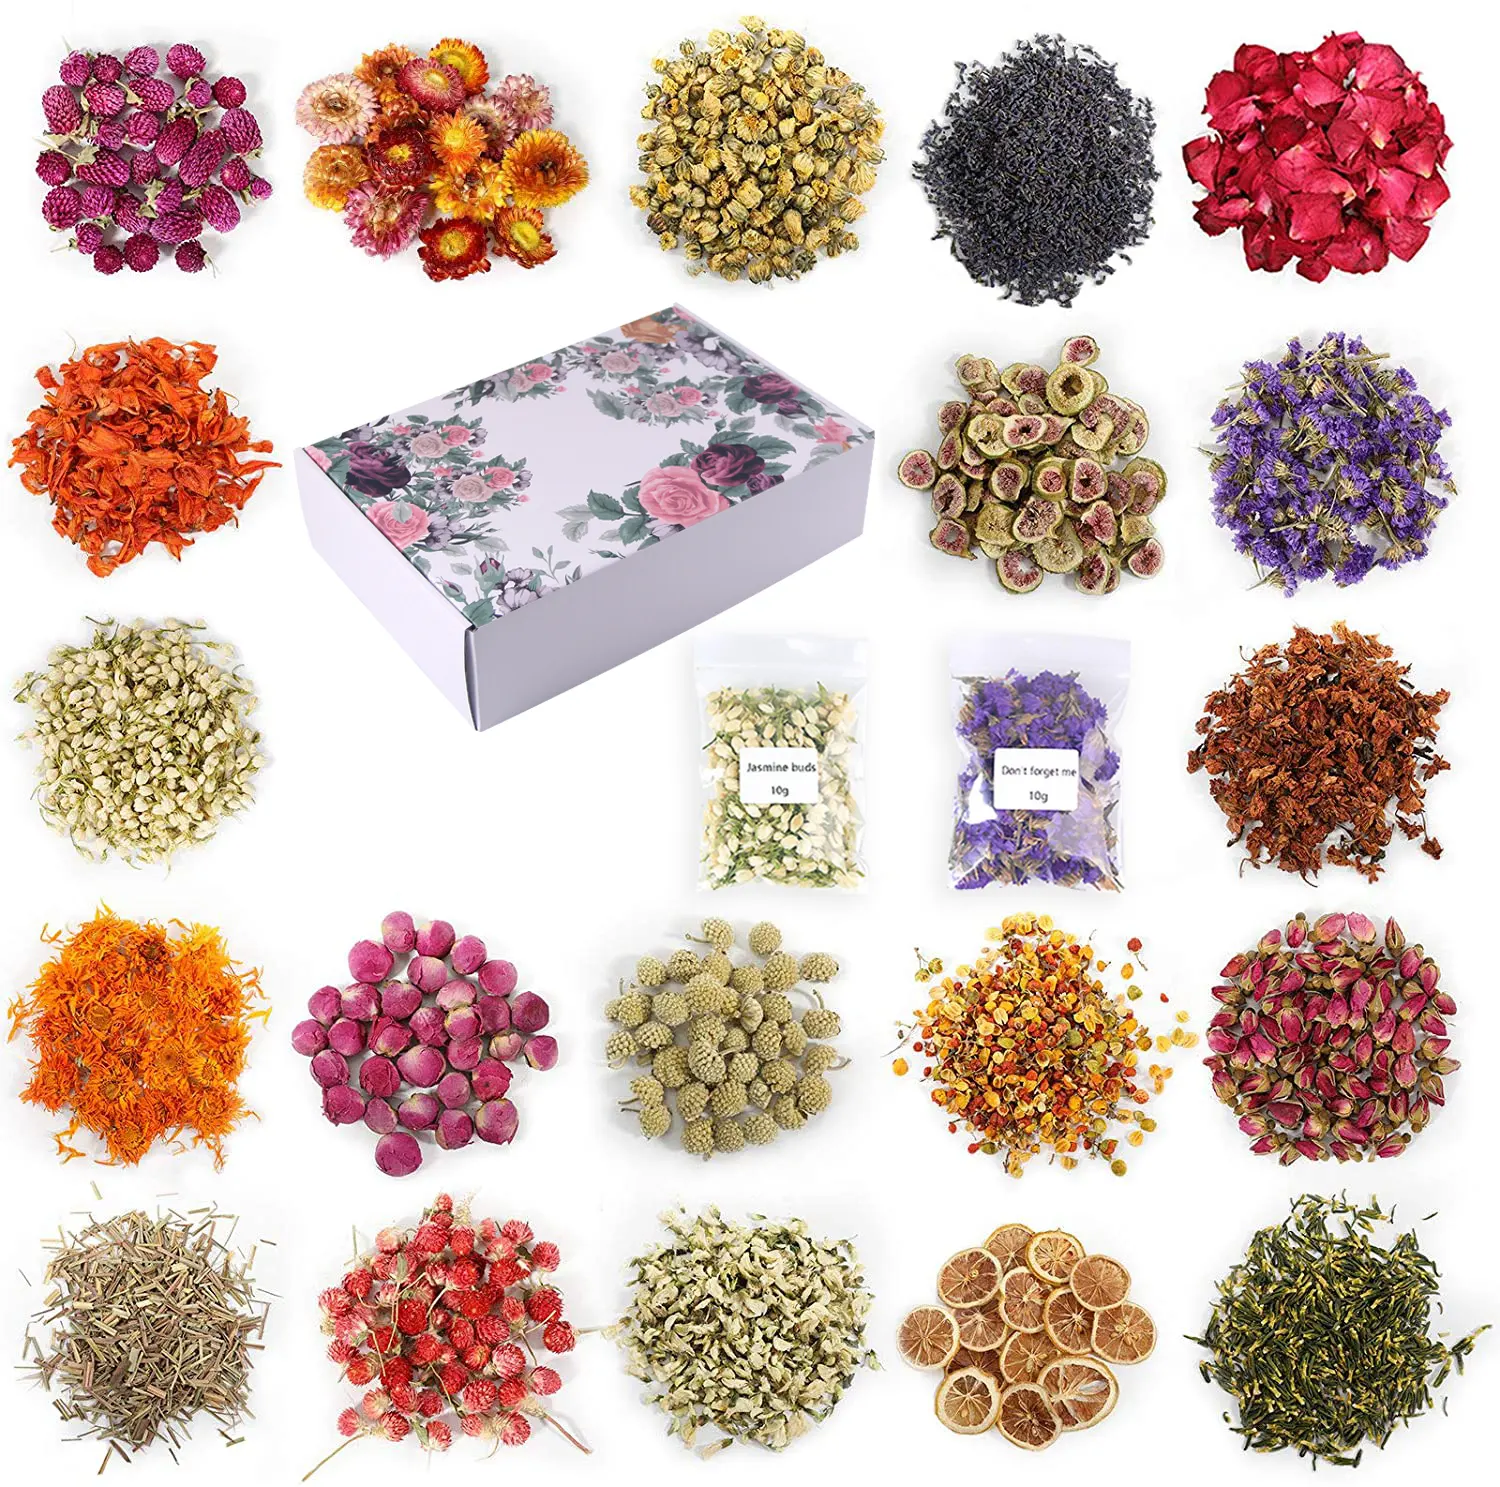 Natural handmade candles dried flowers for scented candle dry flower and resin dry flower for decoration